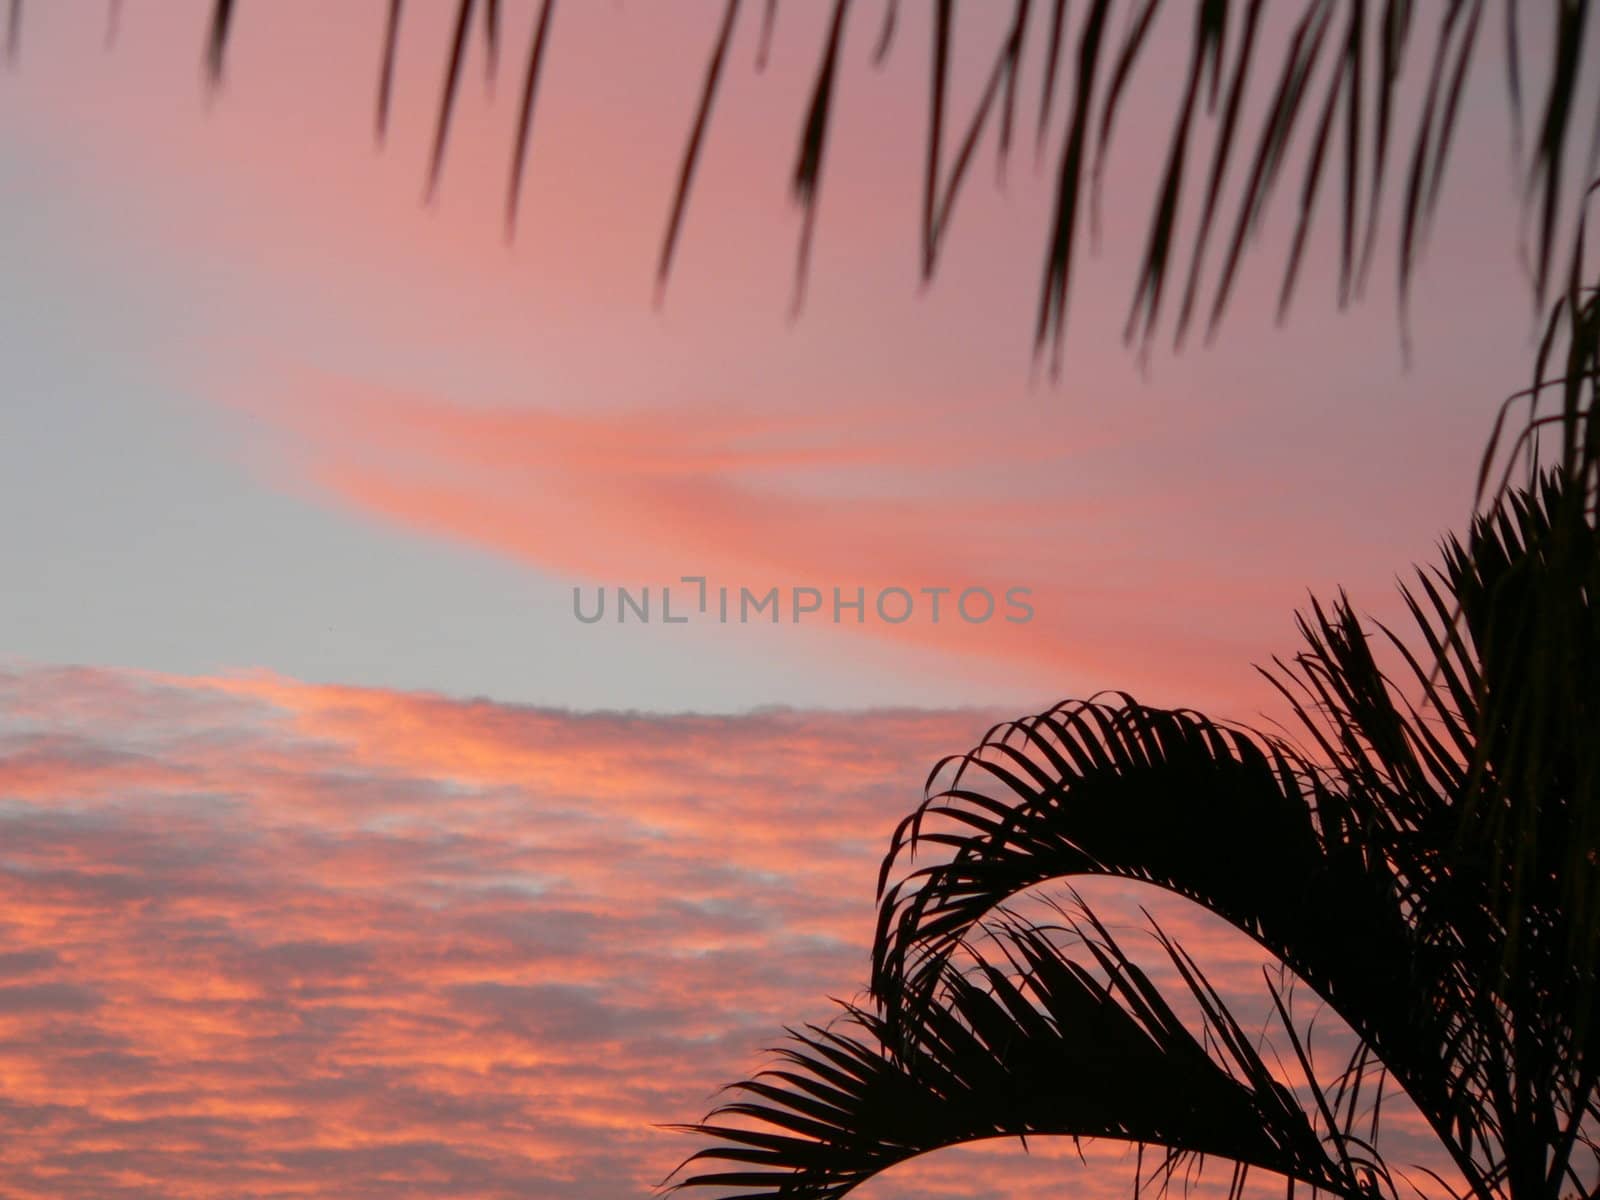 Sunrise or Sunset with palm fronds framing image